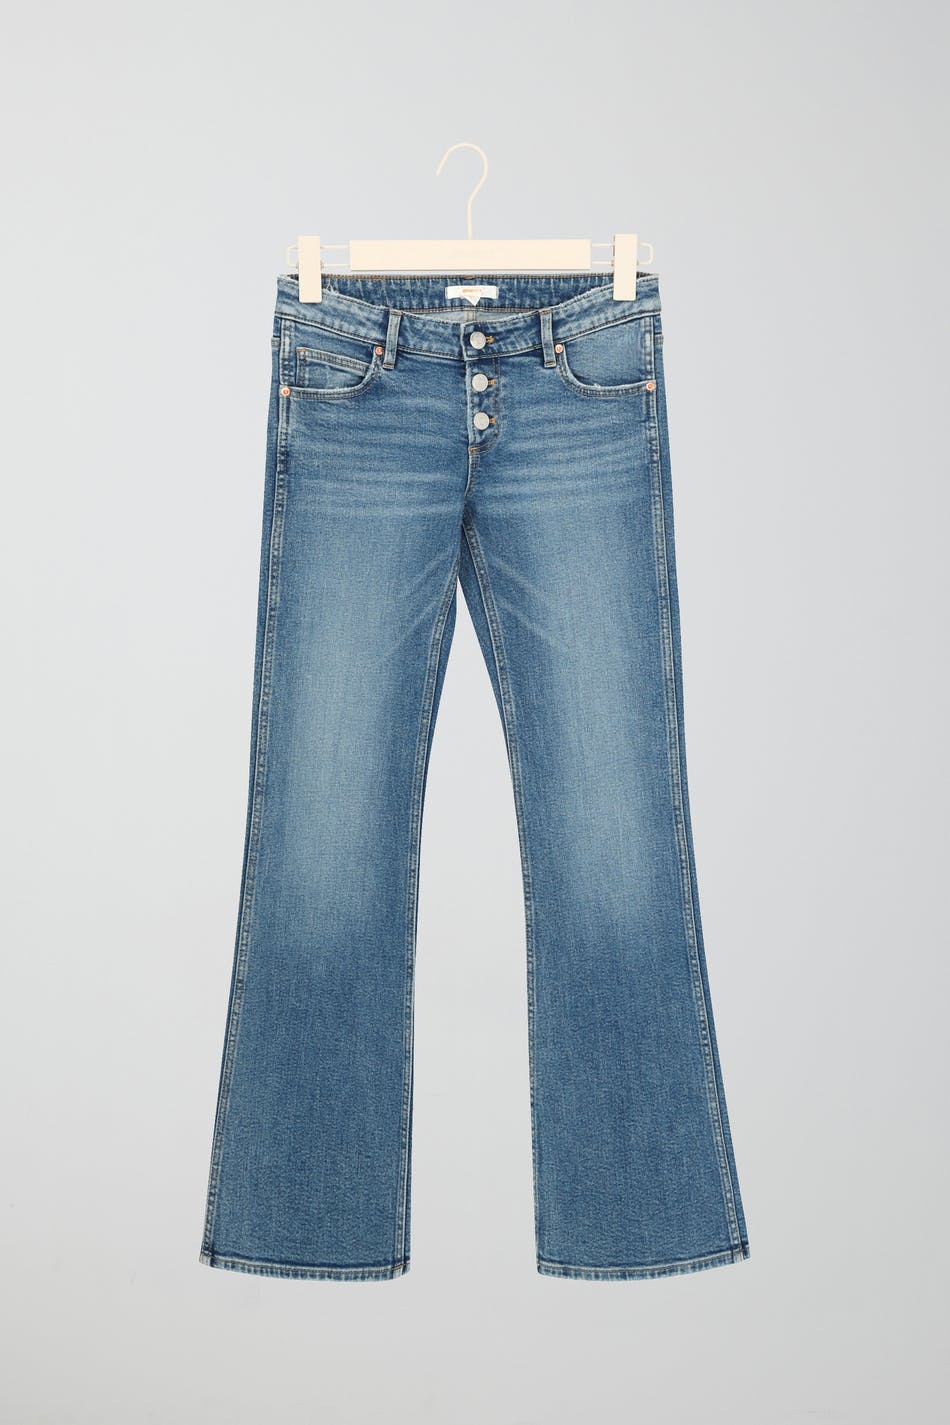 Gina Tricot - Flare button jeans tall - bootcut- Blue - 152 - Female